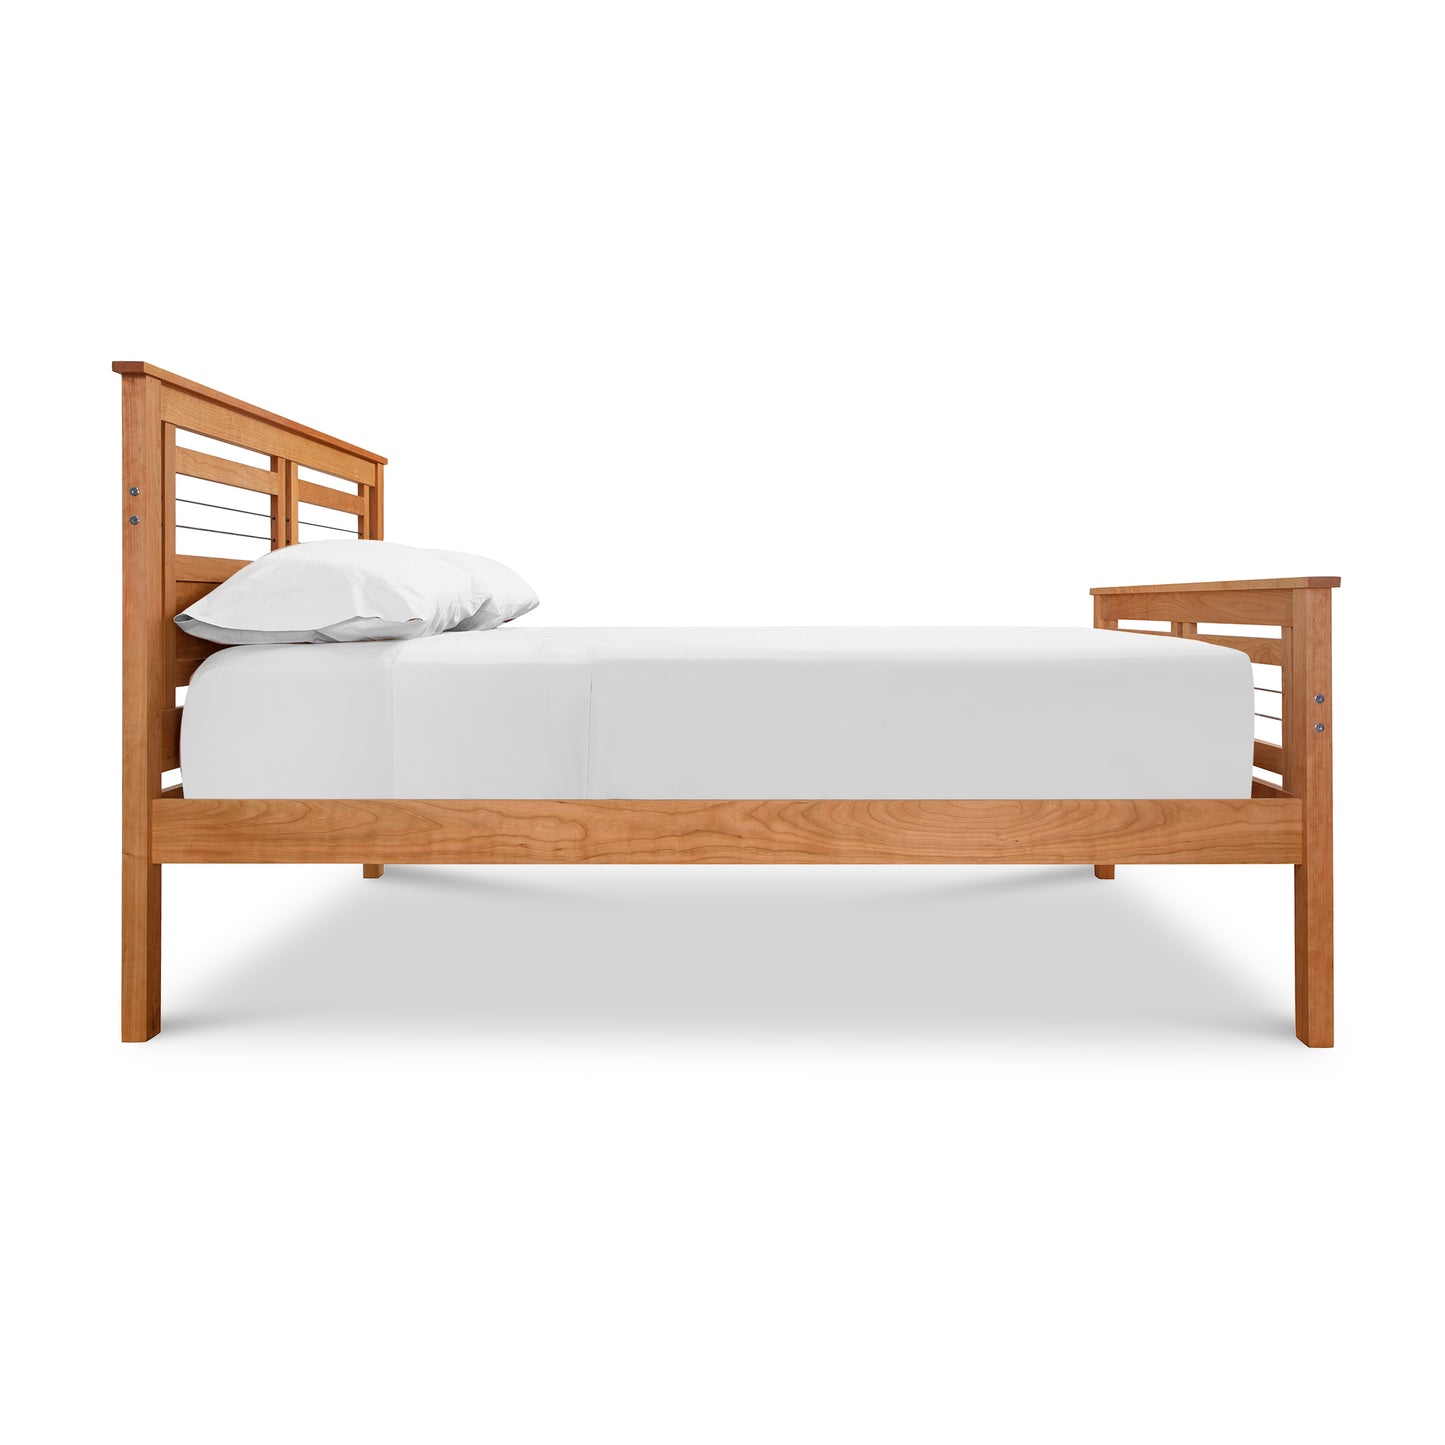 Contemporary Cable Bed frame by Vermont Furniture Designs with a white mattress and a single white pillow, isolated on a white background, featuring an eco-friendly hand-rubbed oil finish.